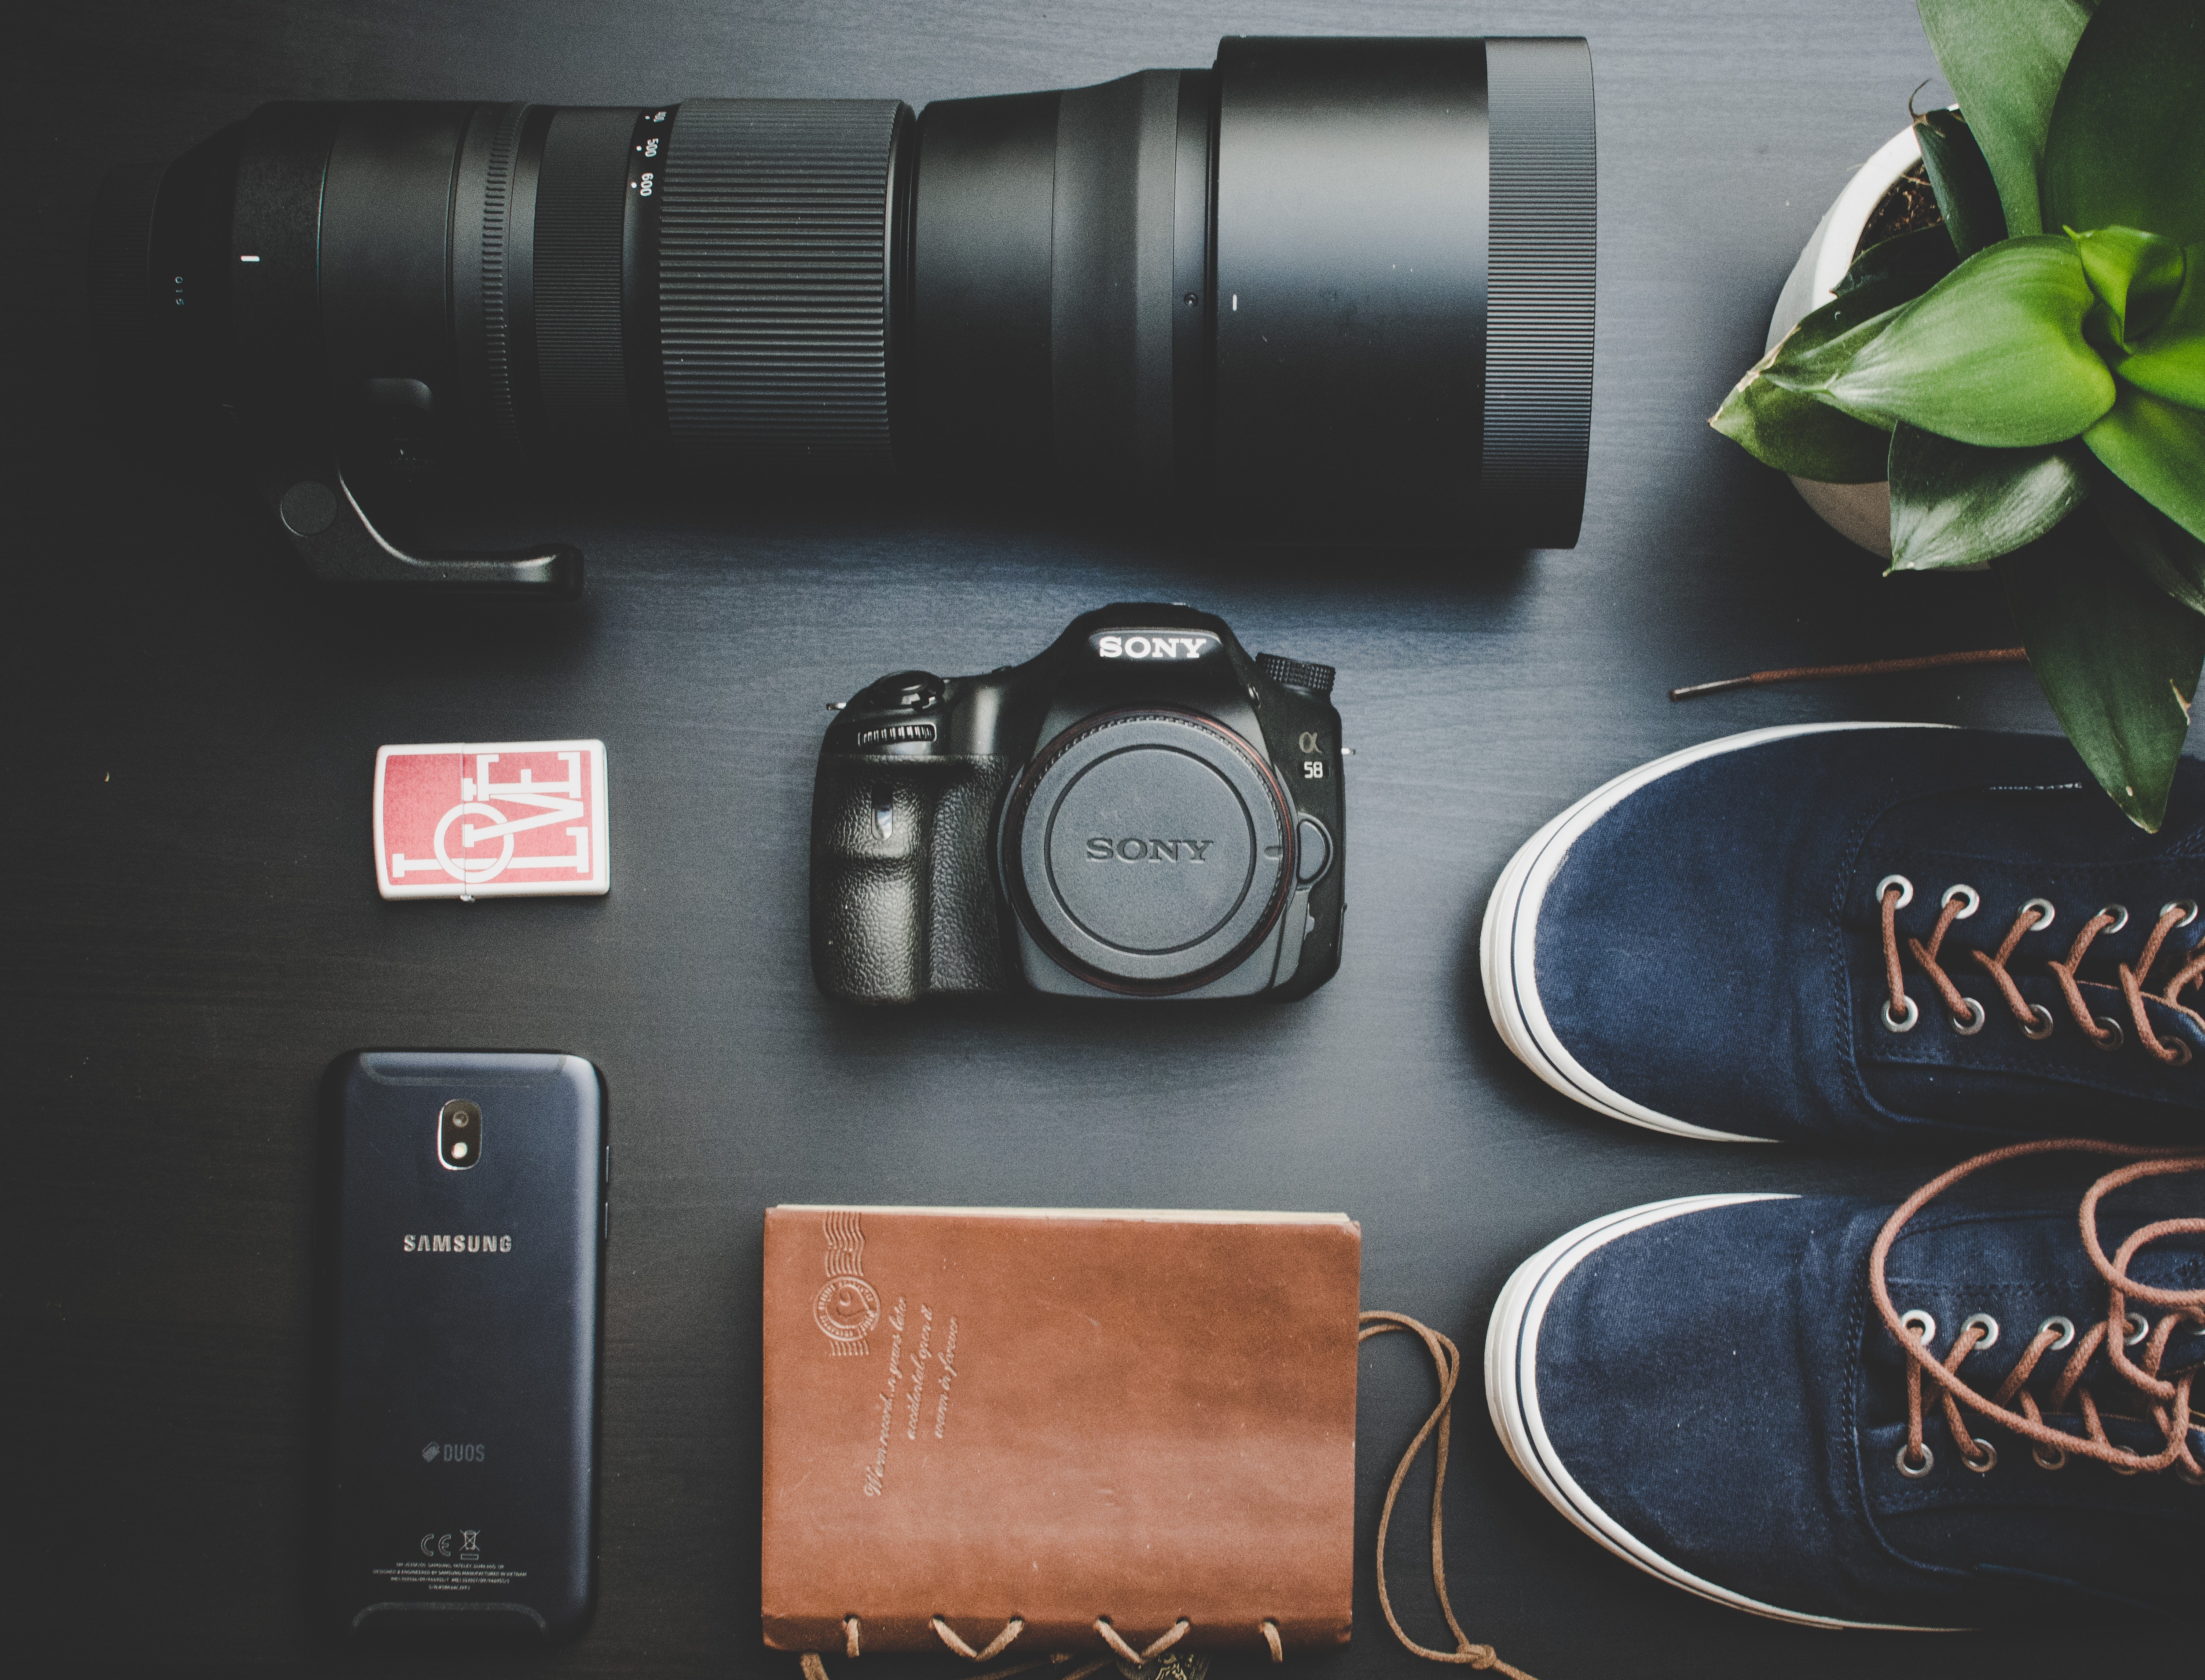 Flat lay photography of shoes near a camera and plant